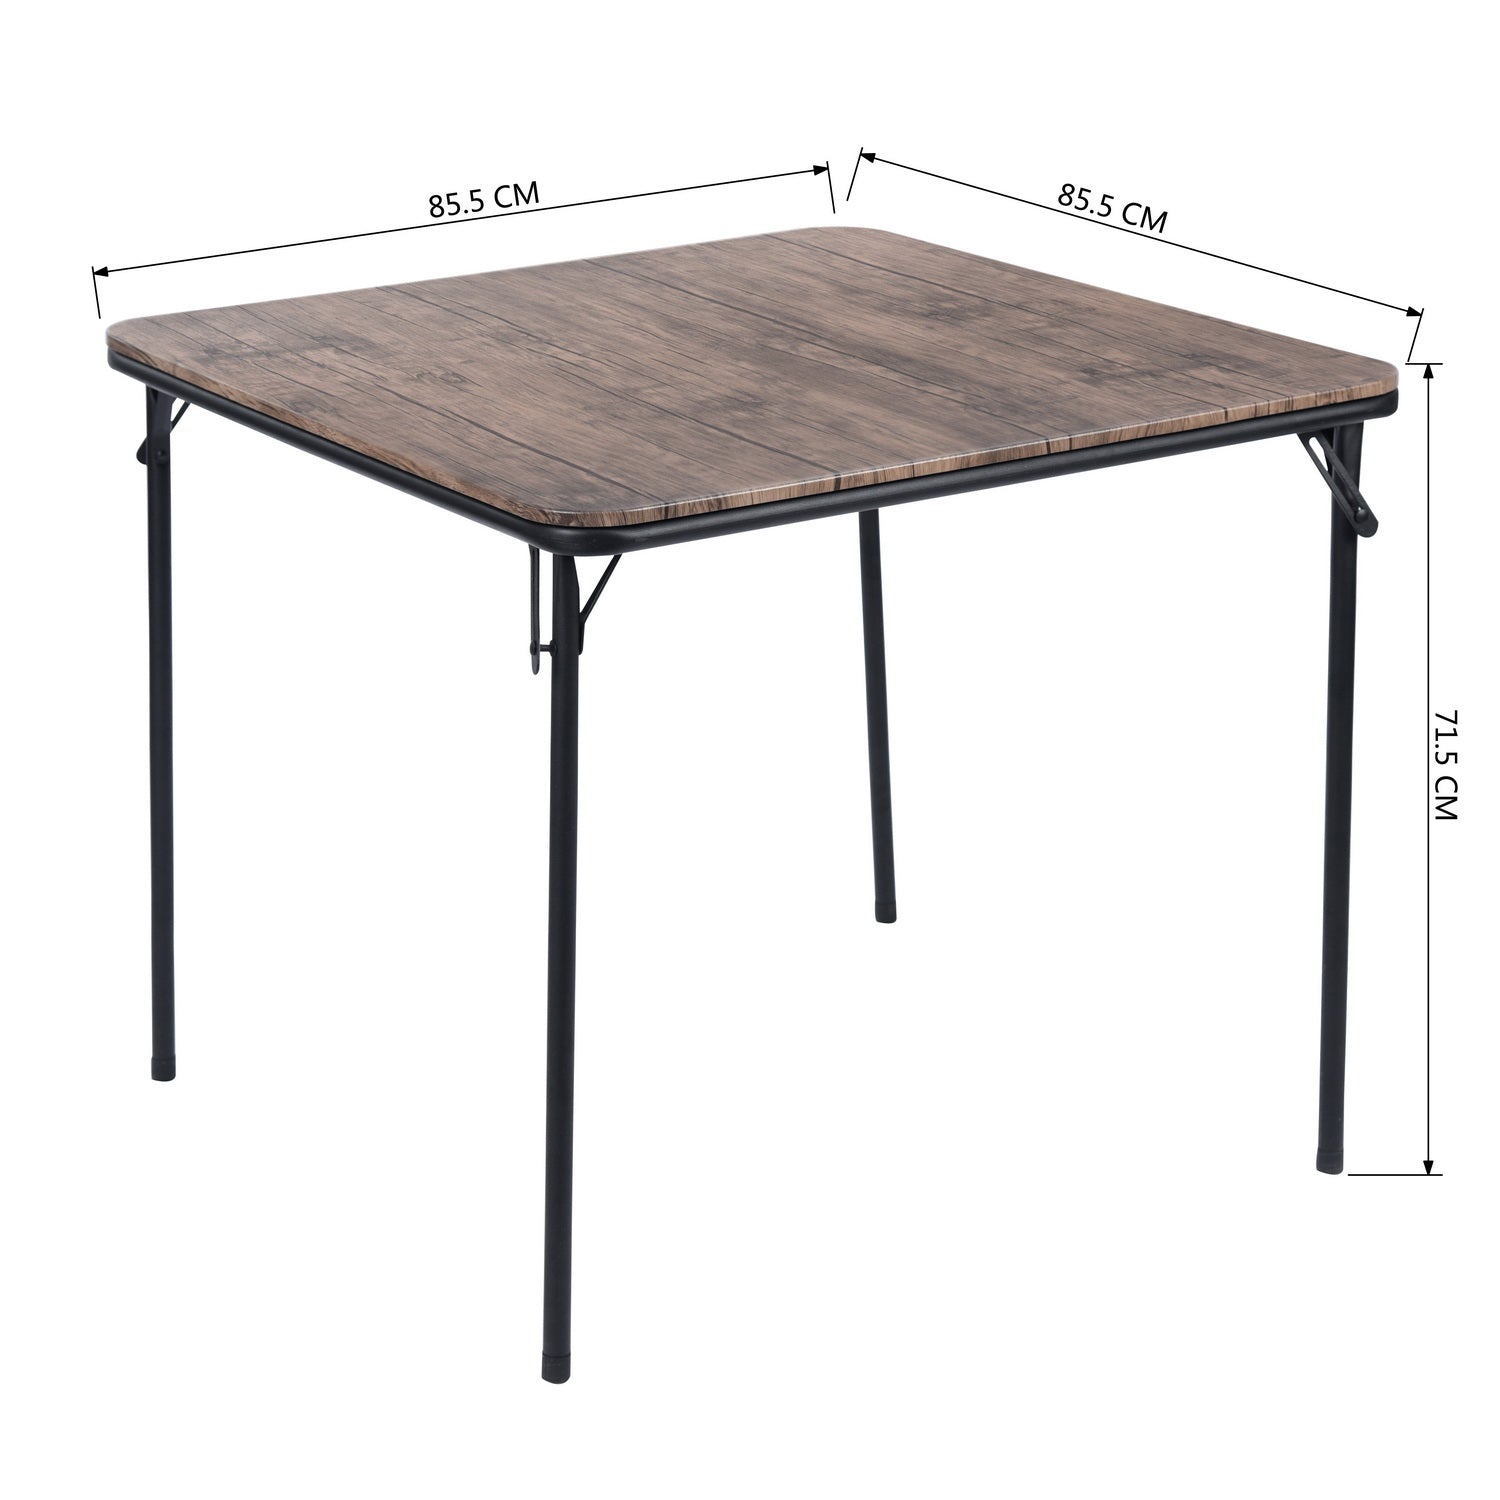 Fern Square Dining Table